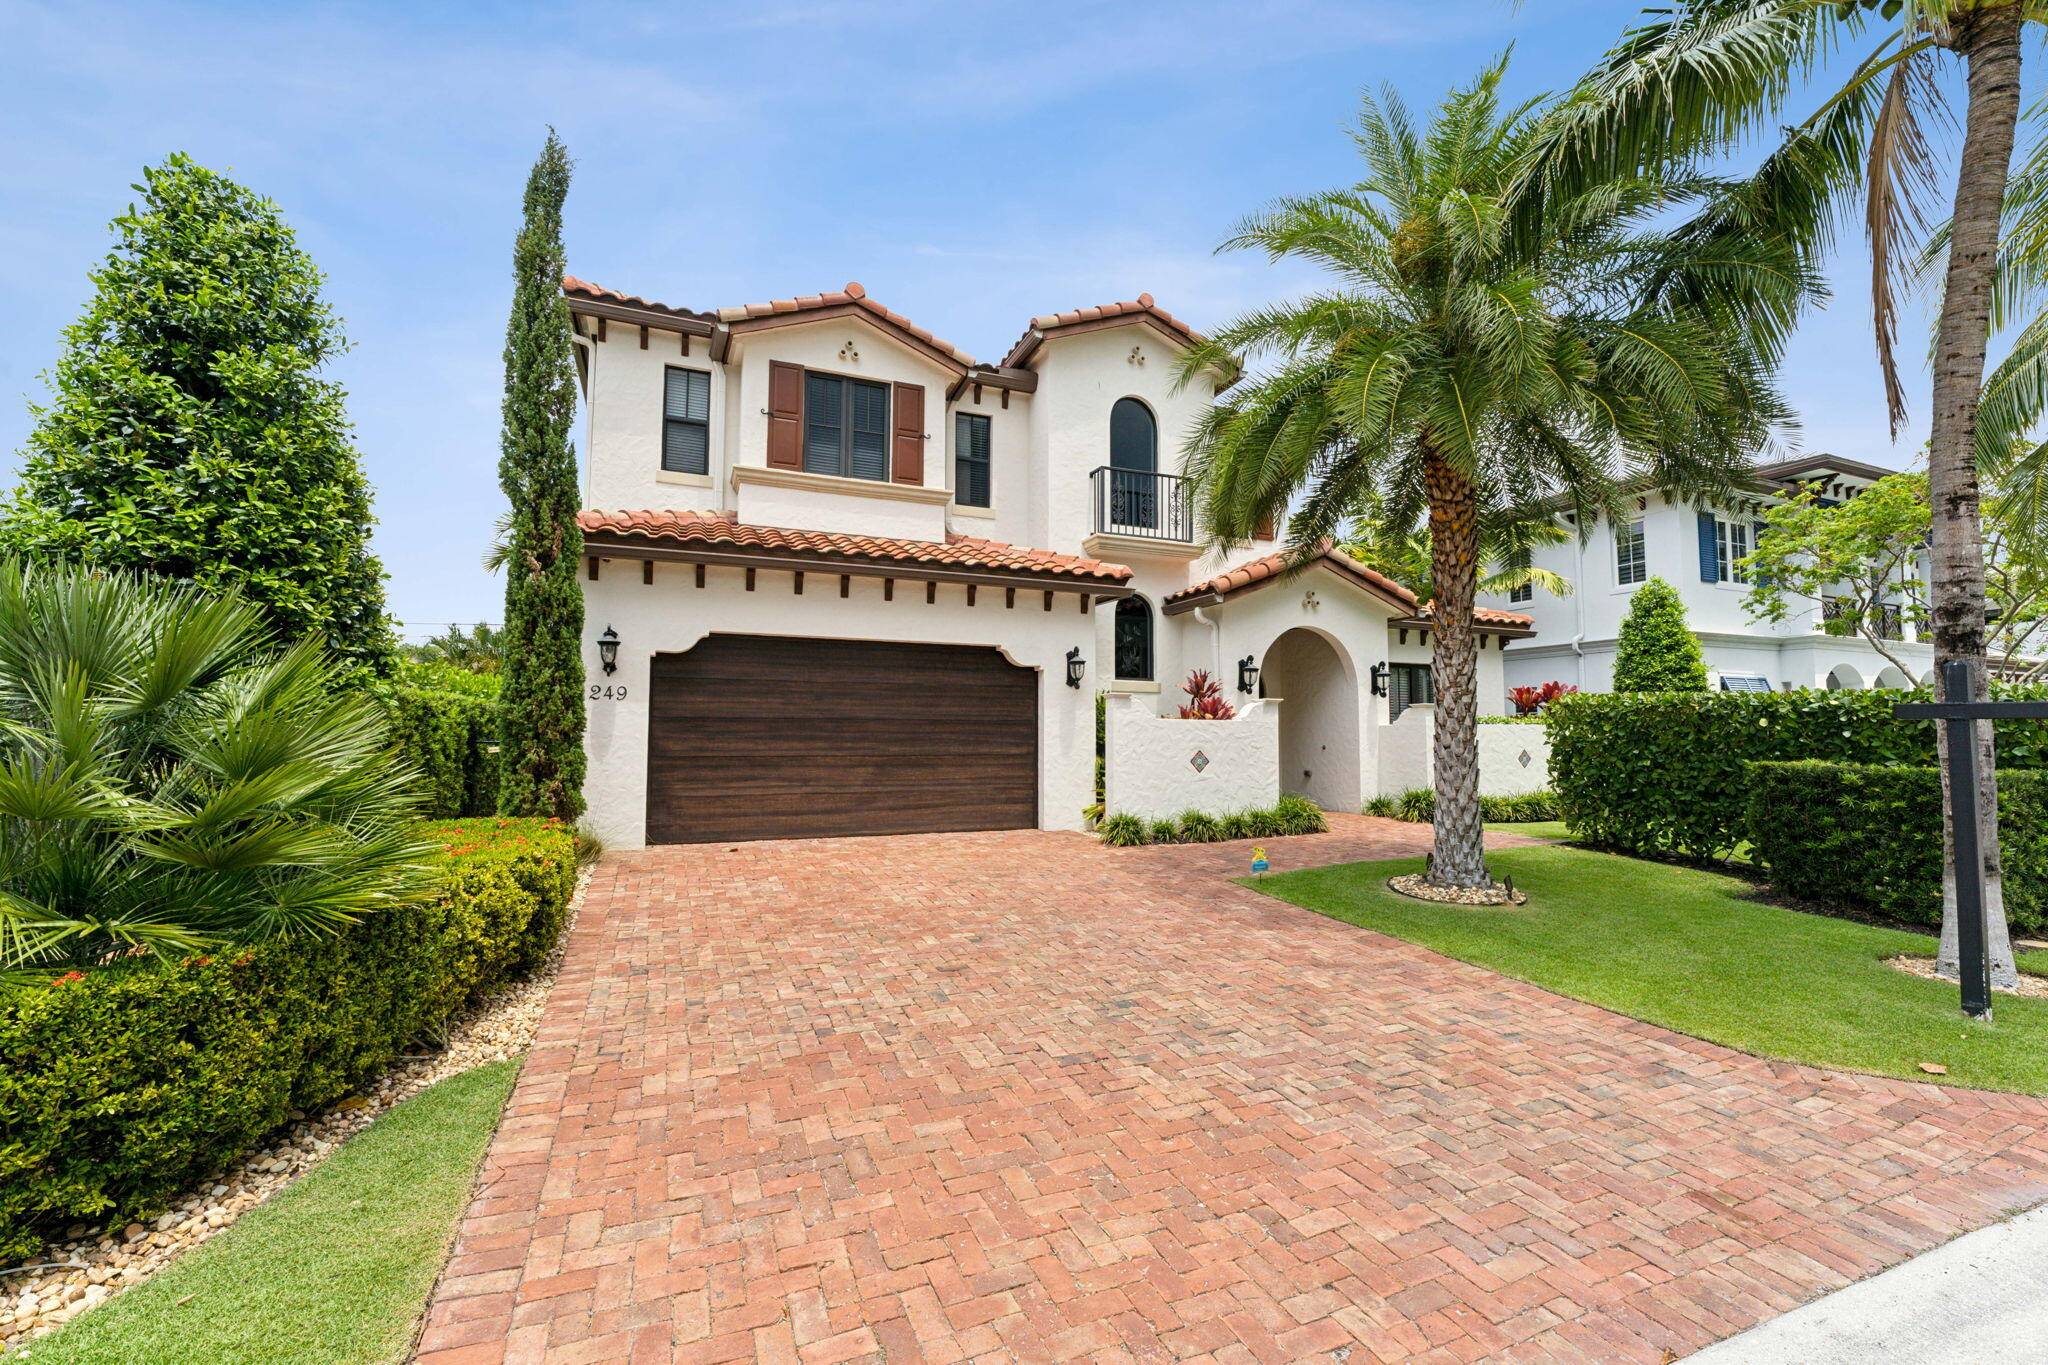 Welcome to one of the most prestigious streets in all of SOSO West Palm Beach !